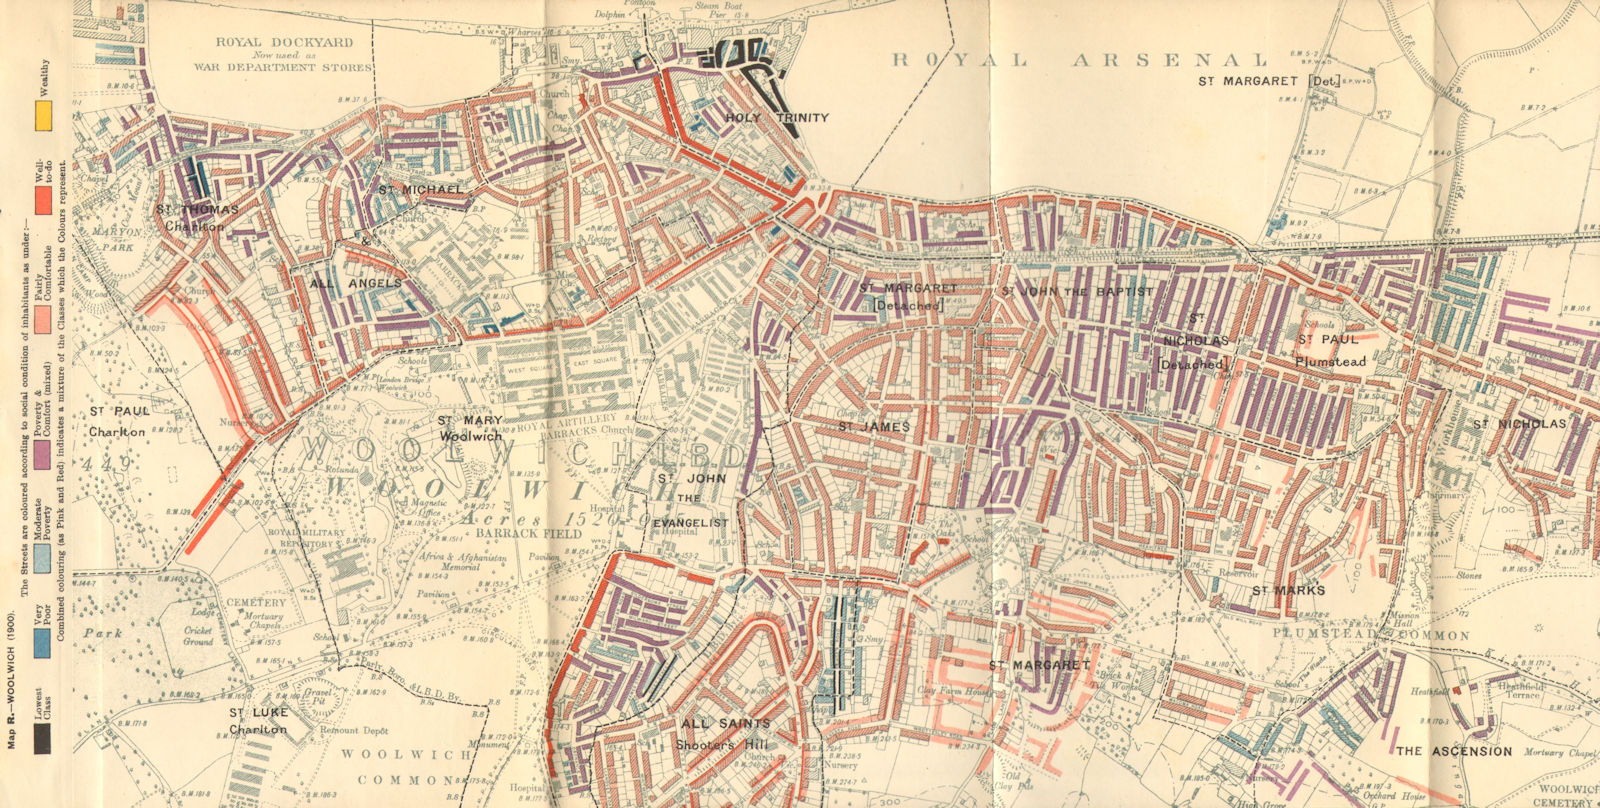 Associate Product WOOLWICH Charles Booth poverty map Plumstead Charlton Shooter's Hill 1902